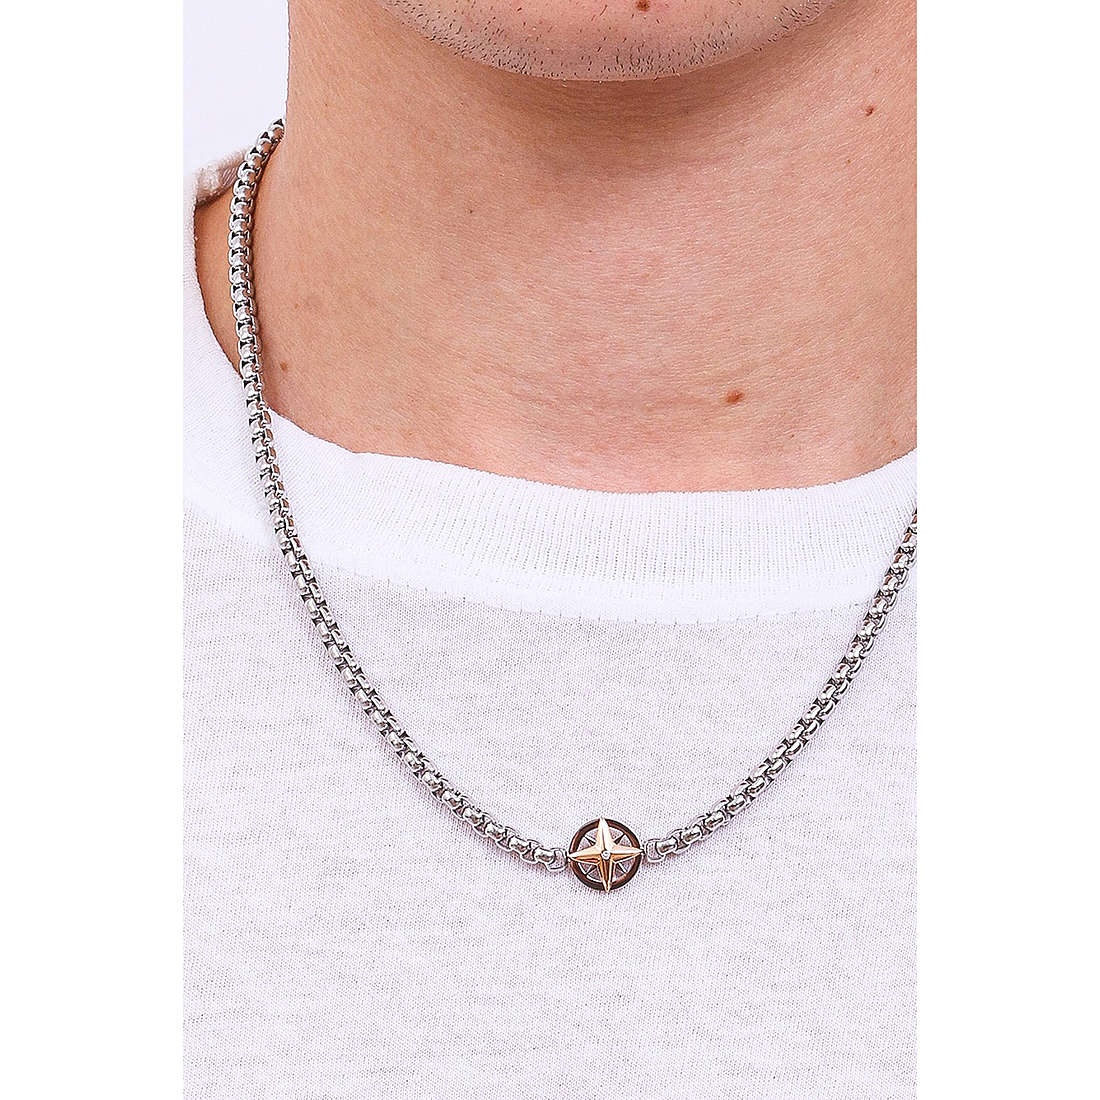 Luca Barra necklaces man CL248 wearing